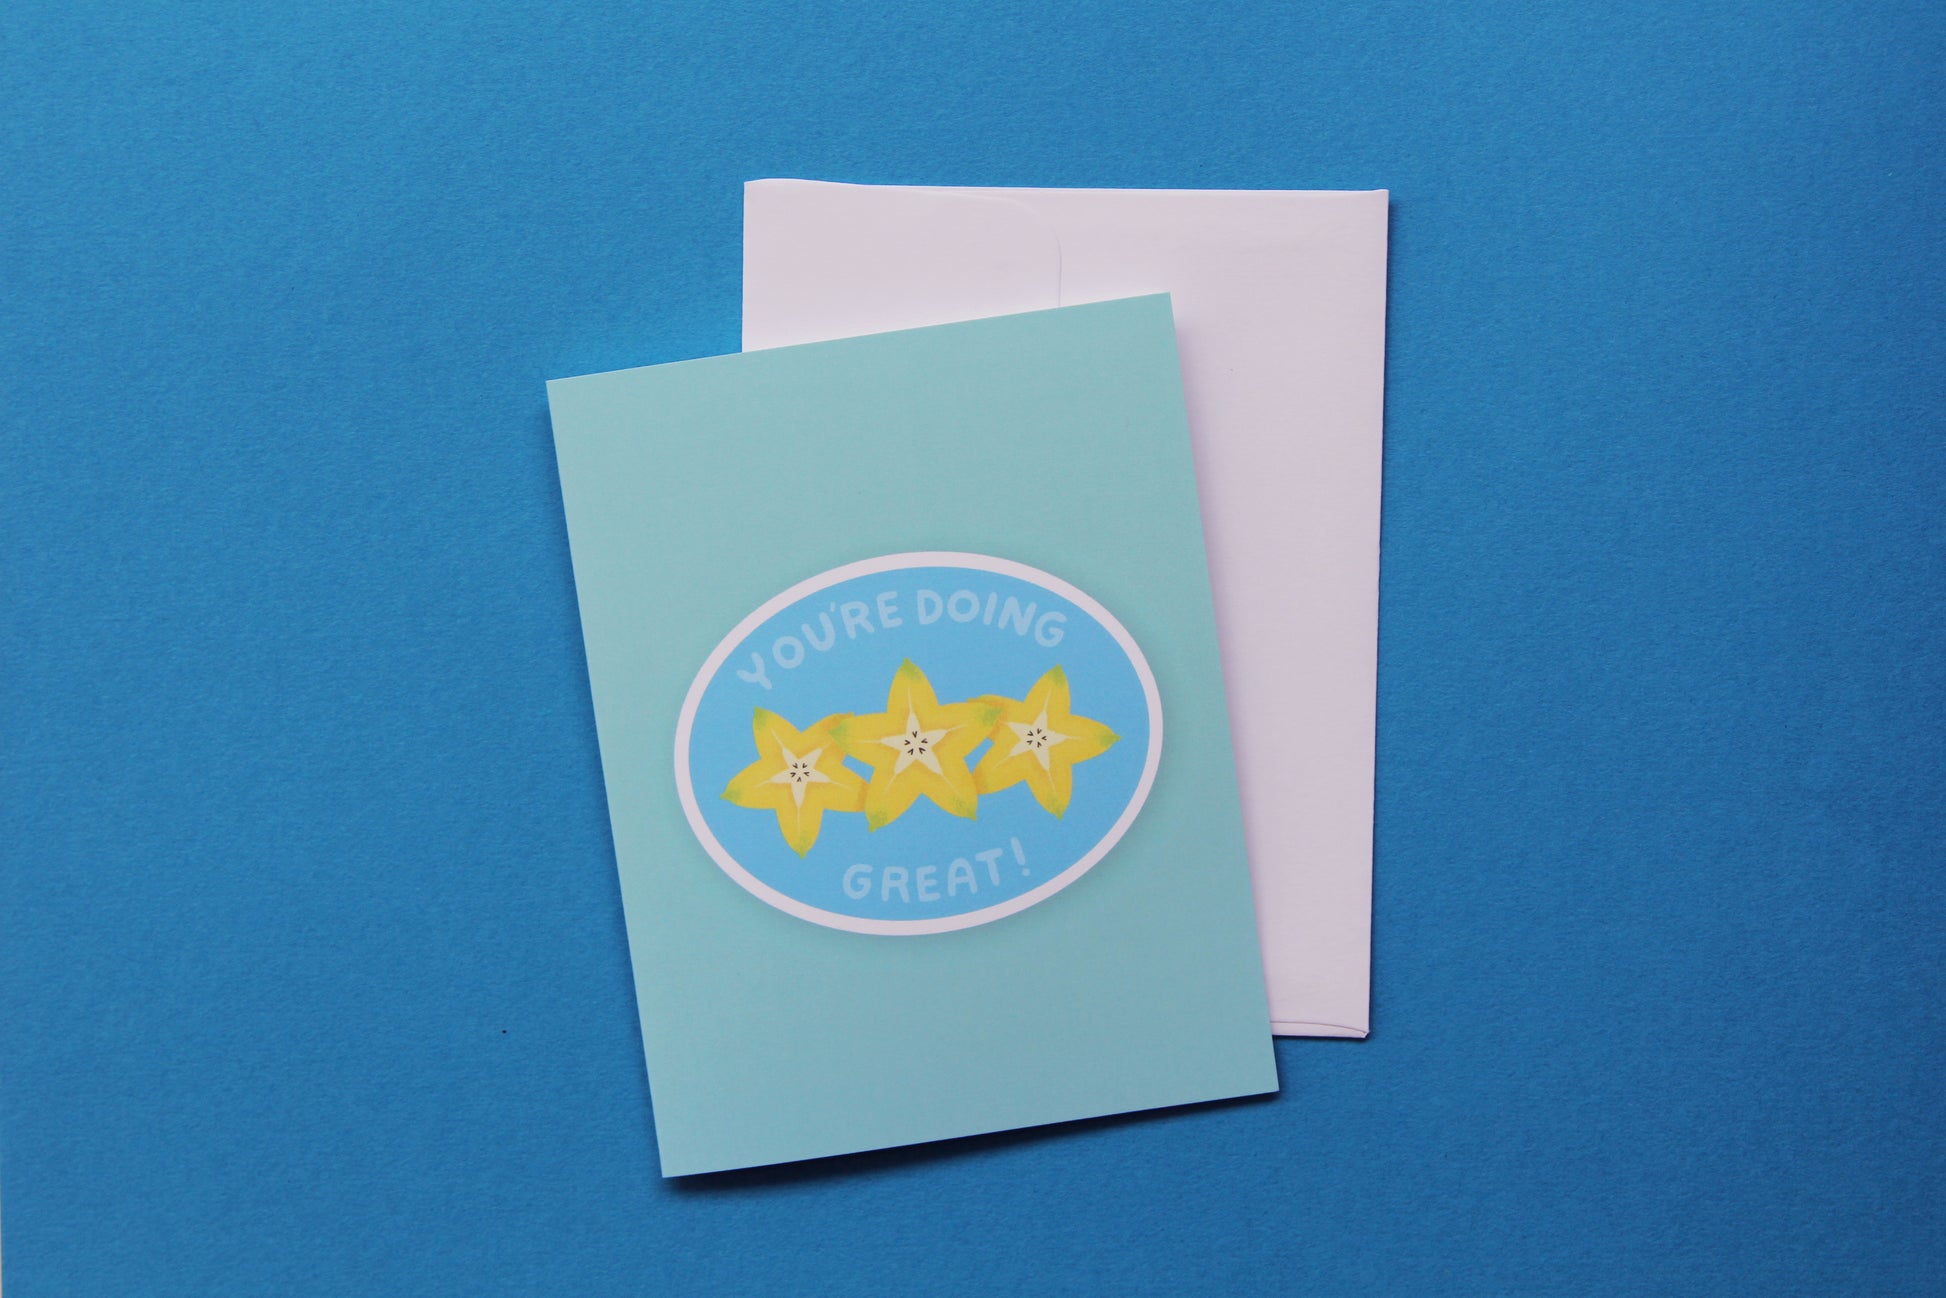 A photo of a blue greeting card with a sliced starfruit that says "You're doing great" and a white envelope on a blue background.